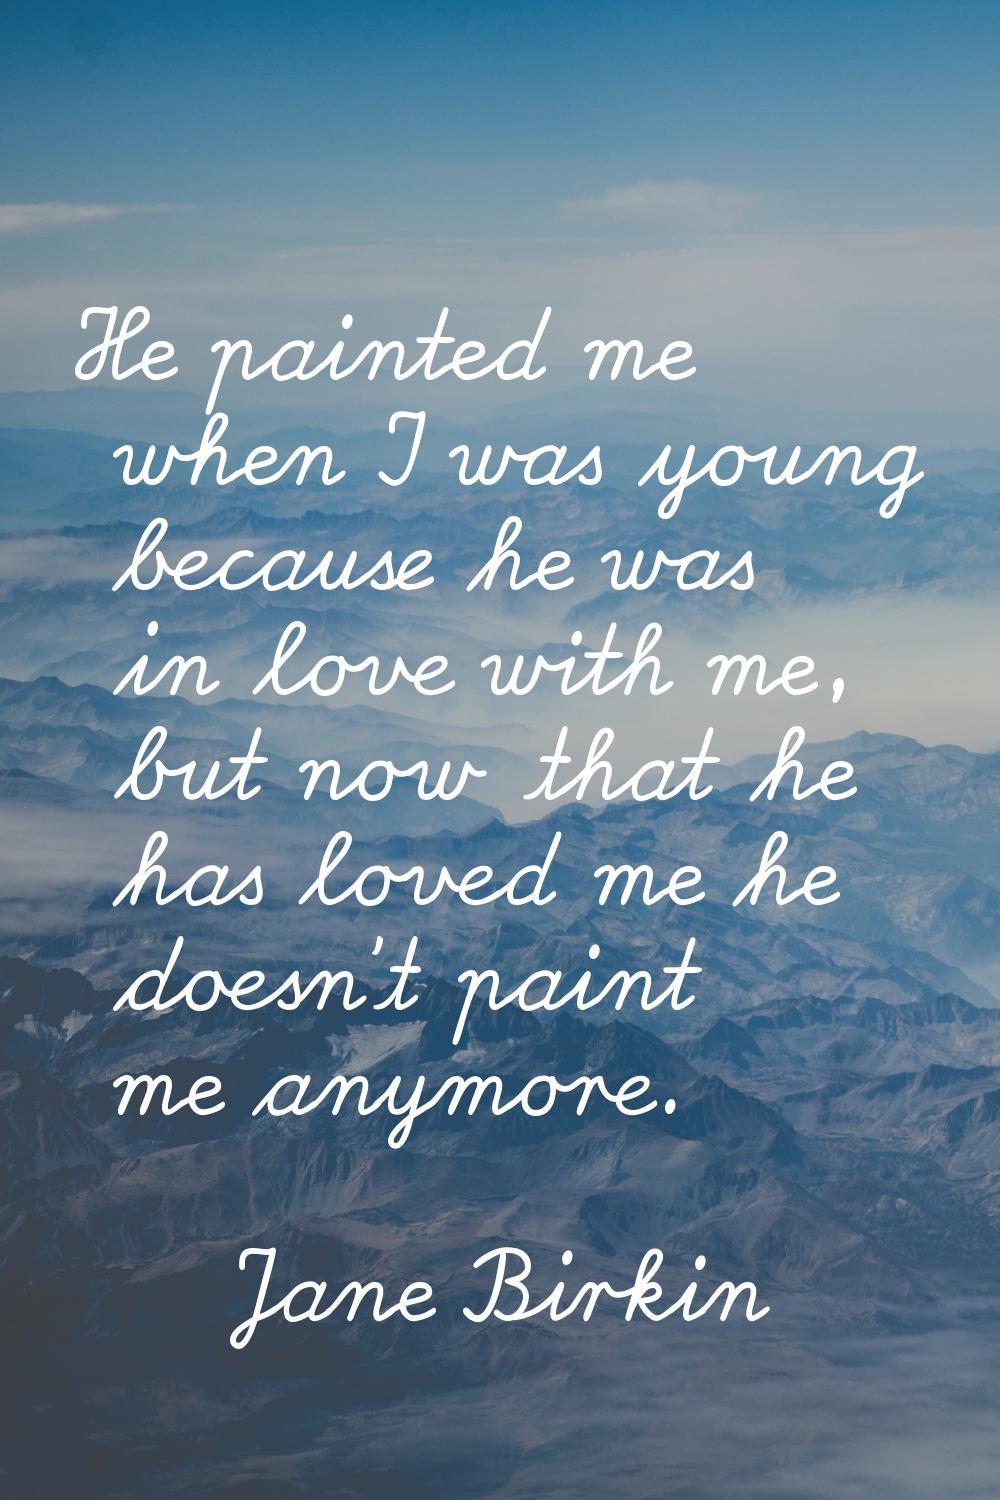 He painted me when I was young because he was in love with me, but now that he has loved me he does